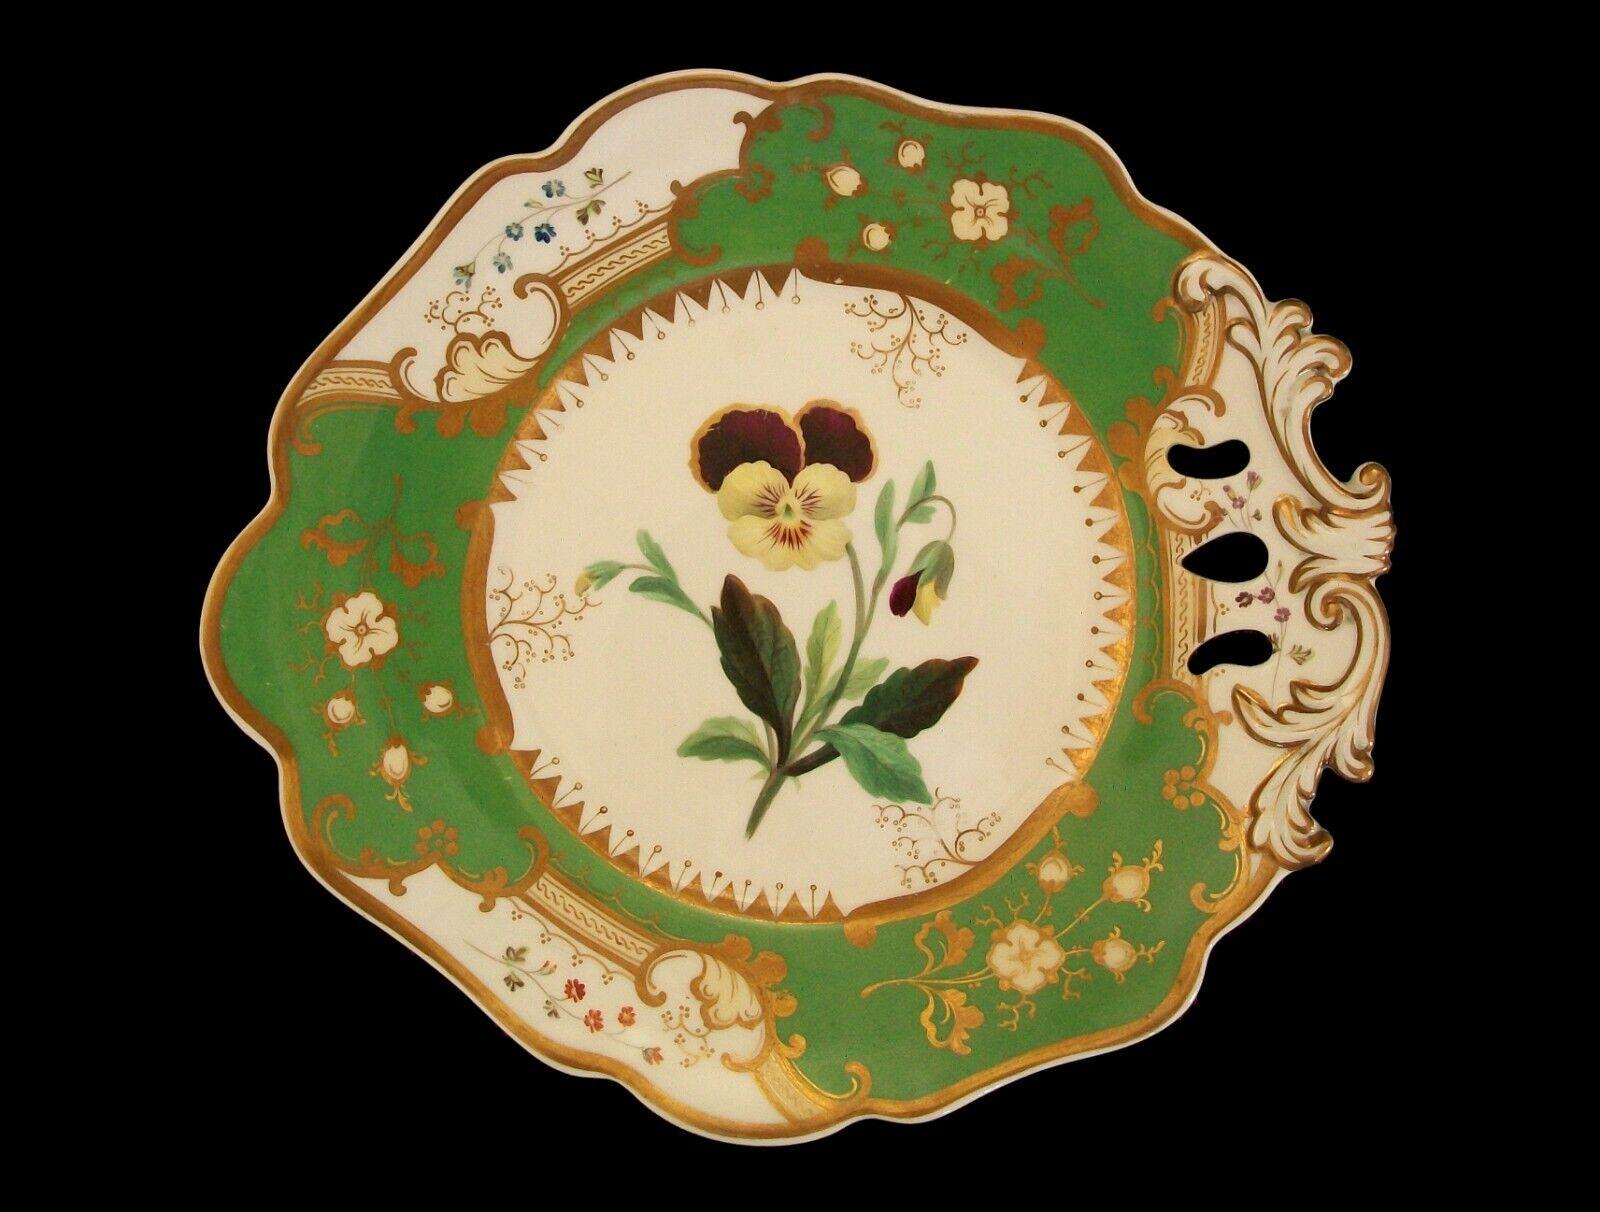 Coalport (Attributed) - 'Pansy' - Antique ceramic single handled botanical serving platter with apple green borders and gilded decoration - featuring a hand painted floral specimen to the center - pattern number to the back - unsigned - United